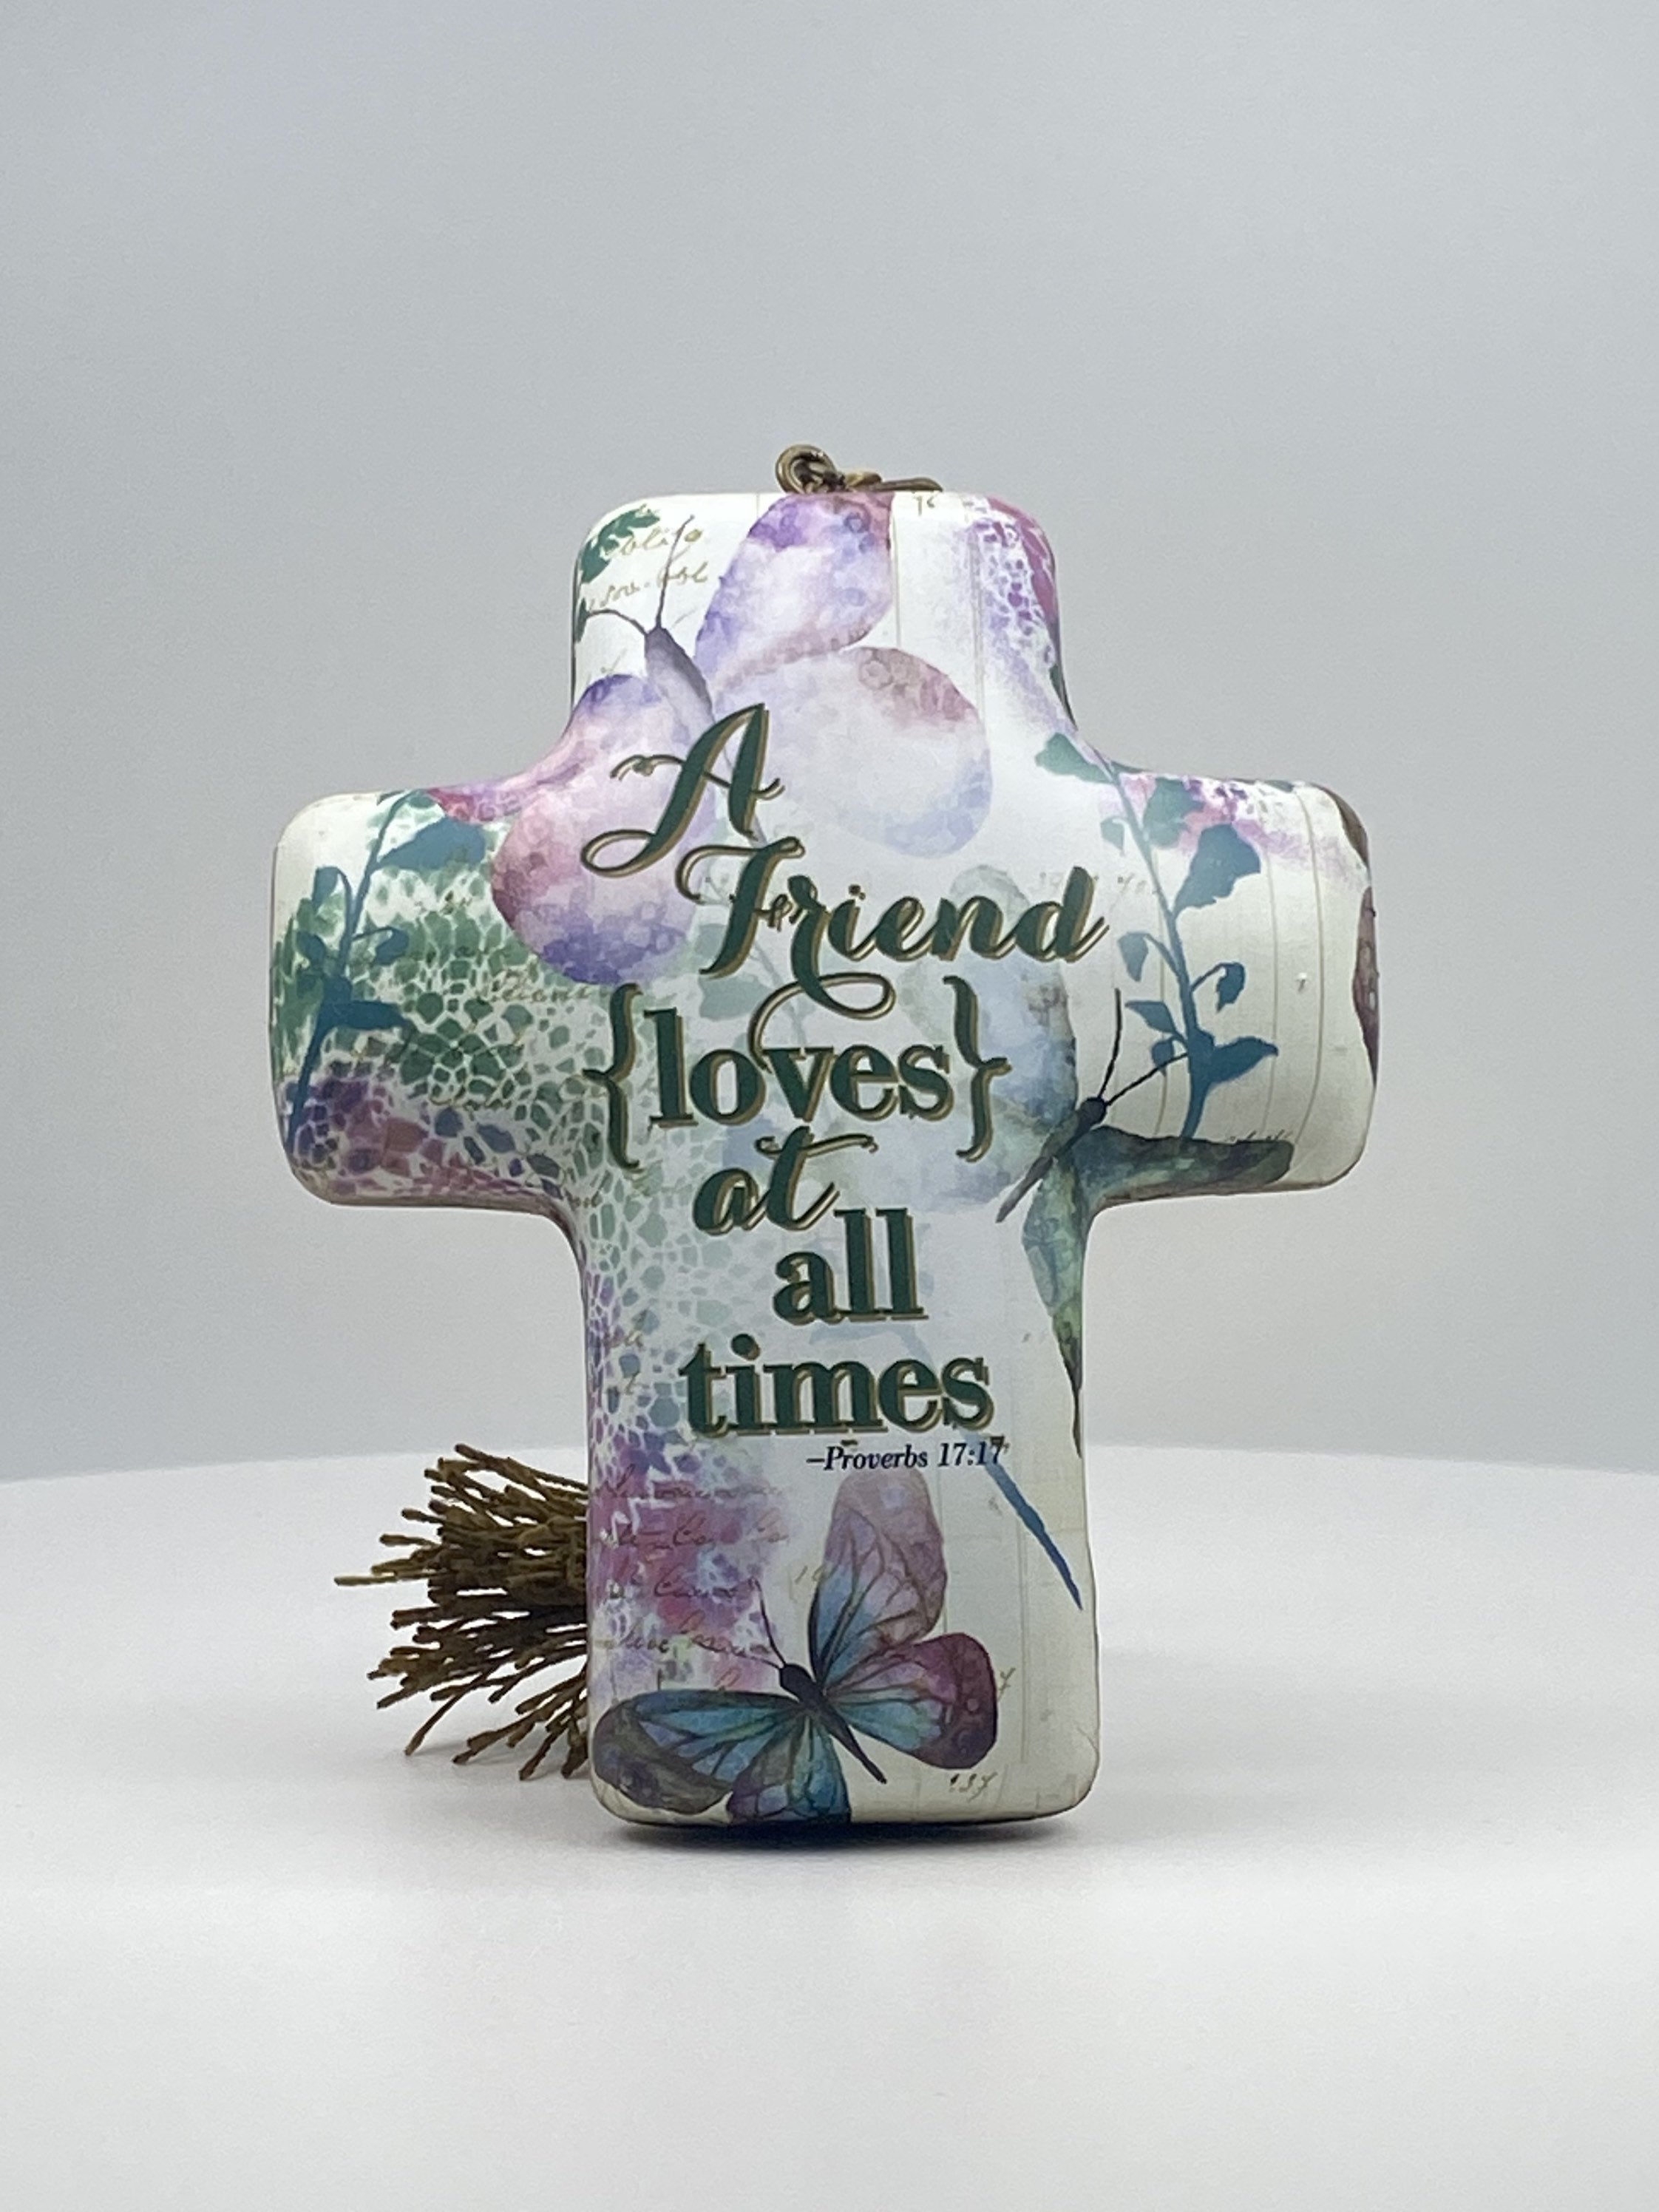 A Friend Loves at All Times Artful Cross